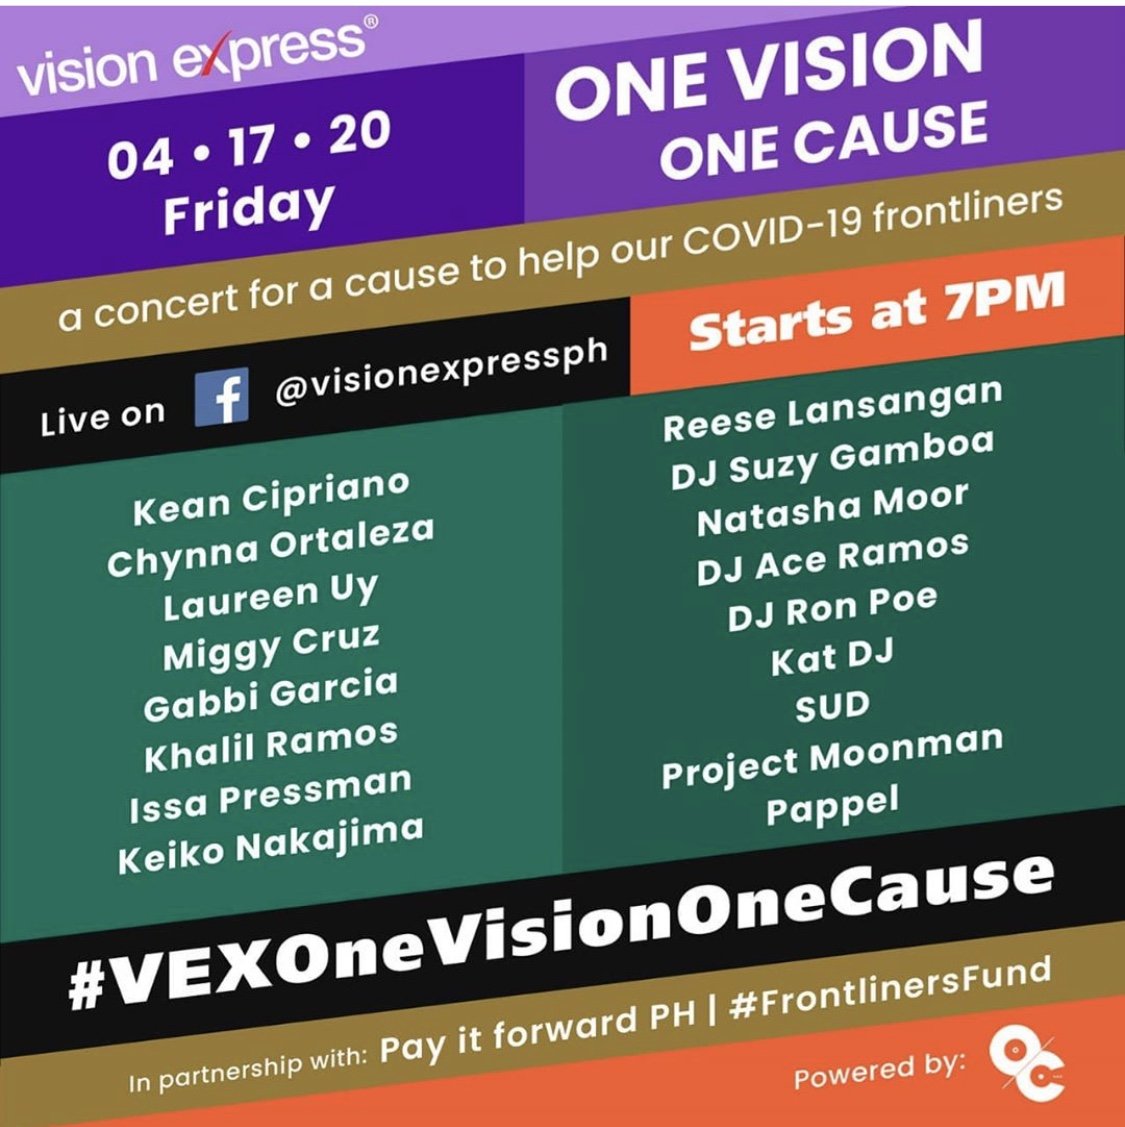 One Vision, One Cause: Concert for a cause to help our Frontliners - Vision Express Philippines